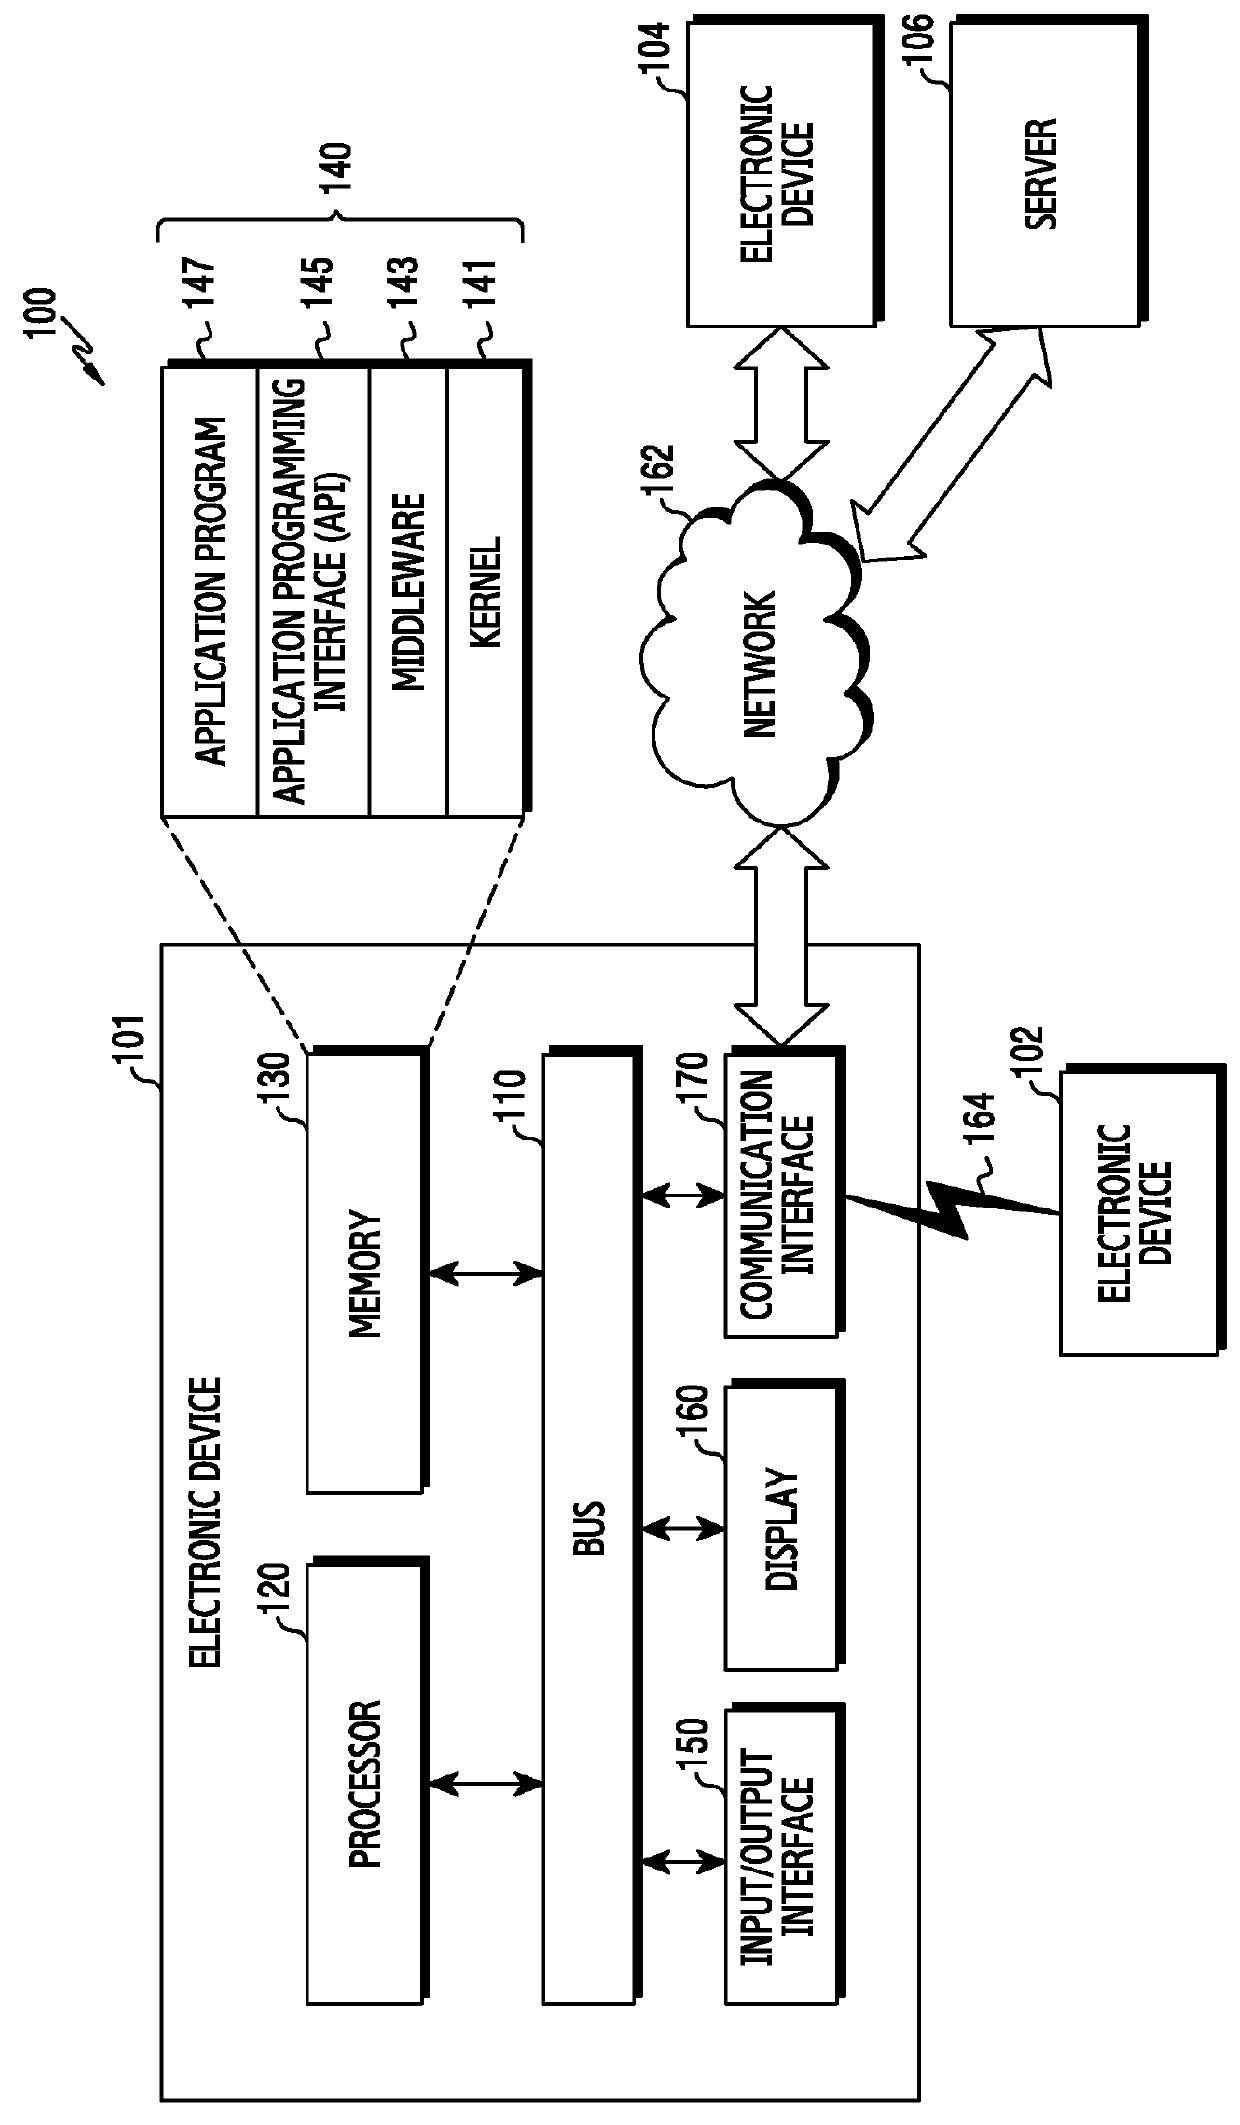 Method and apparatus for connection between electronic devices